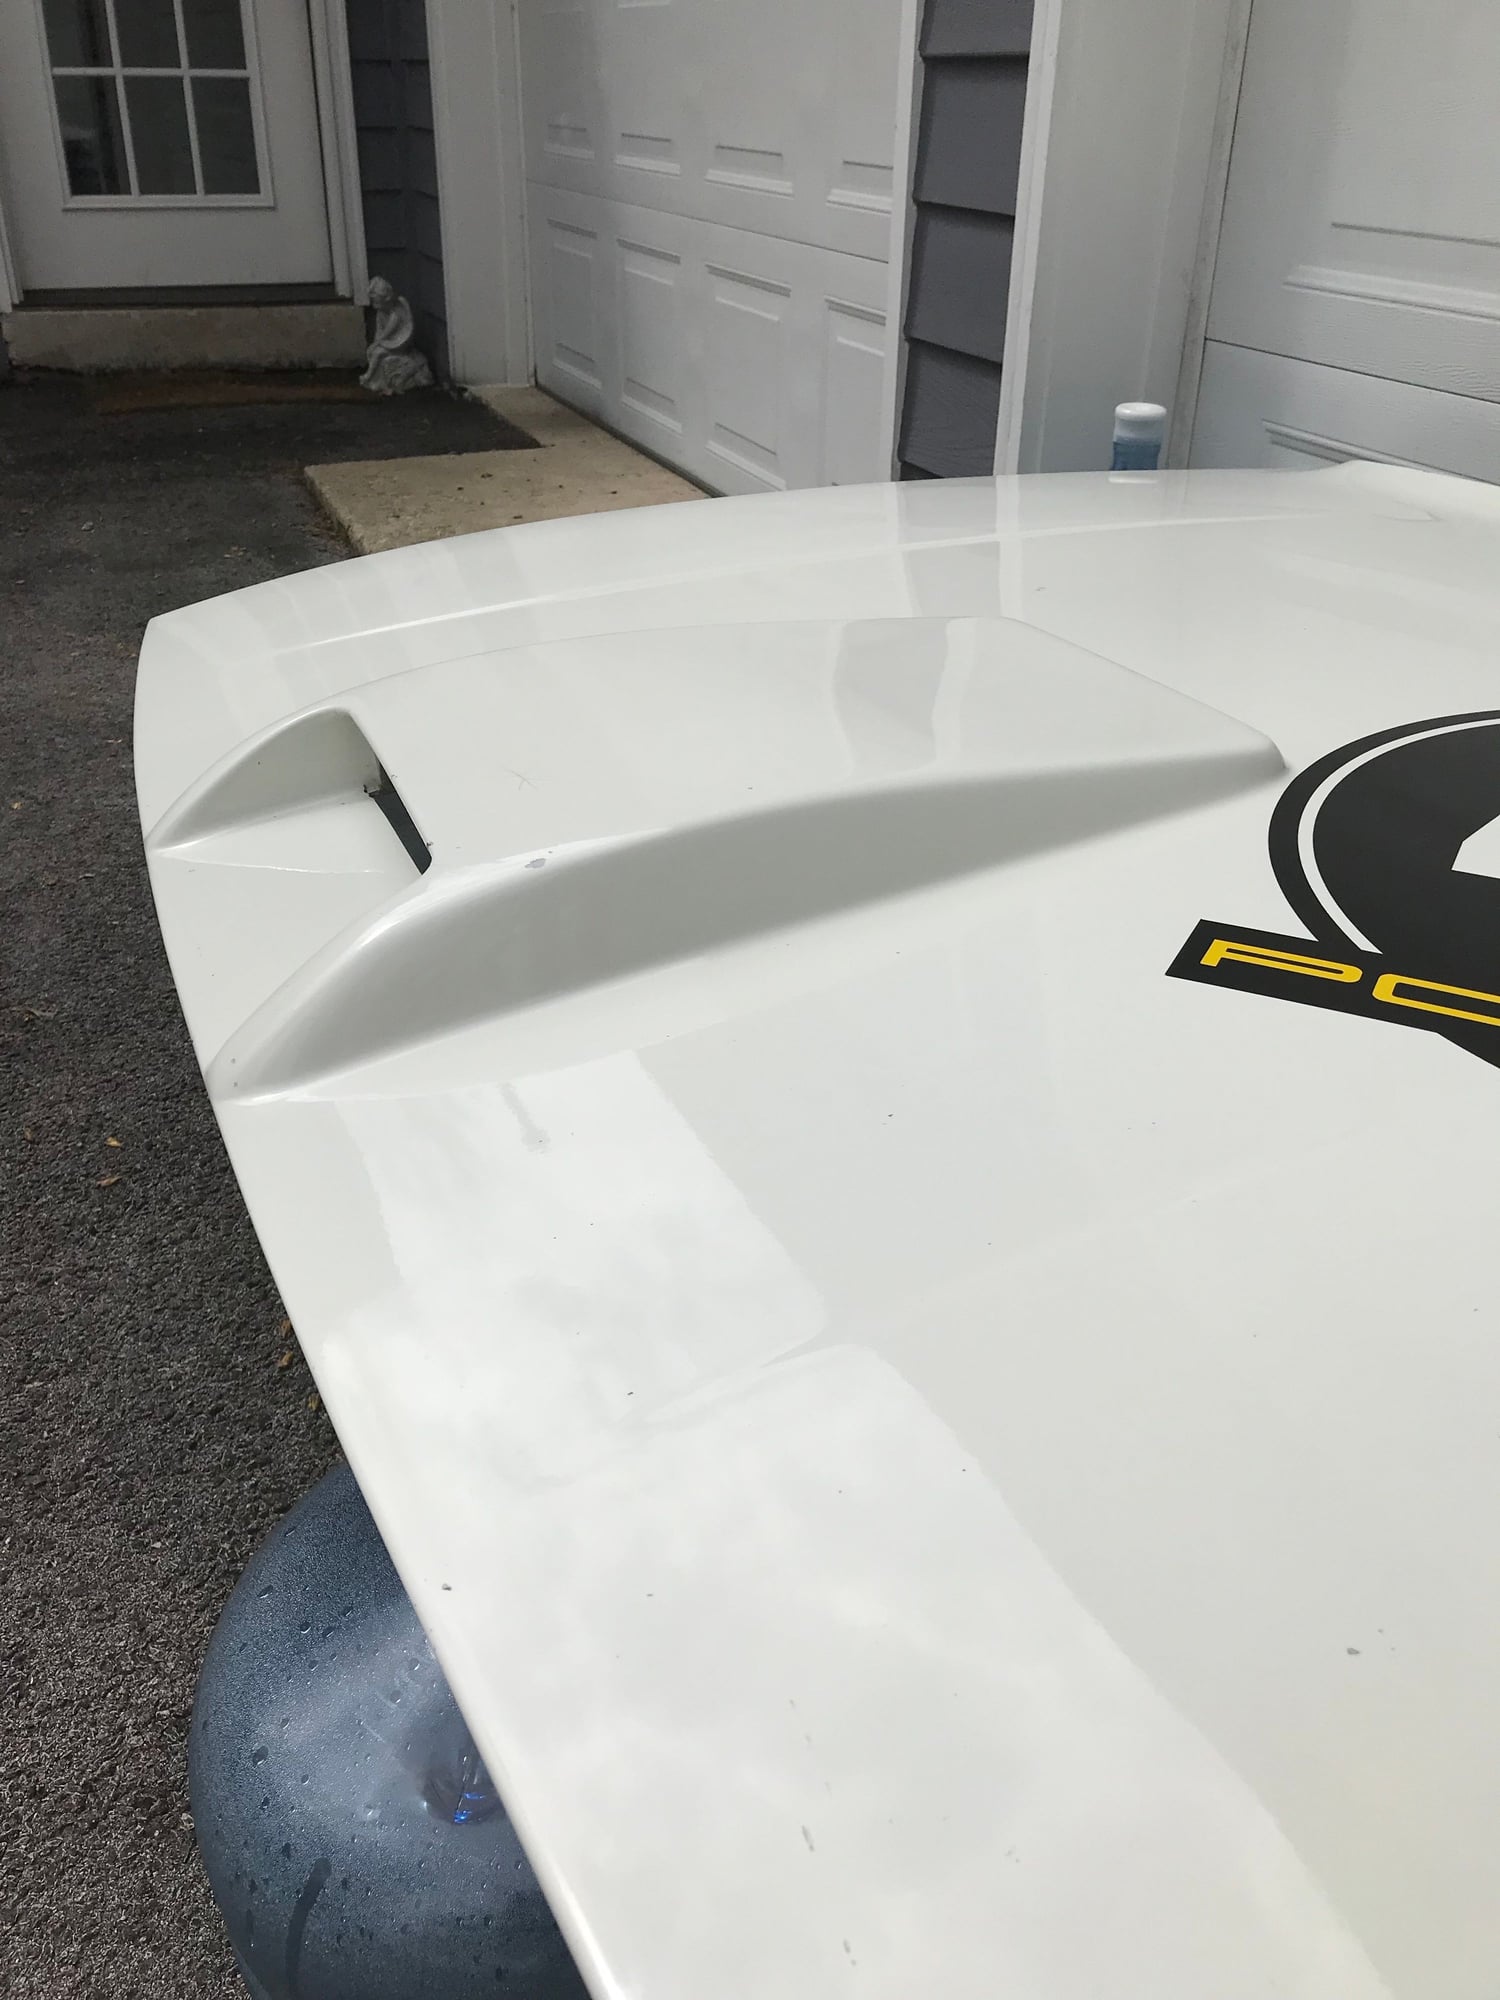 Exterior Body Parts - 944 Turbo ram air hood with scoop - Used - 1986 to 1989 Porsche 944 - Naperville, IL 60565, United States